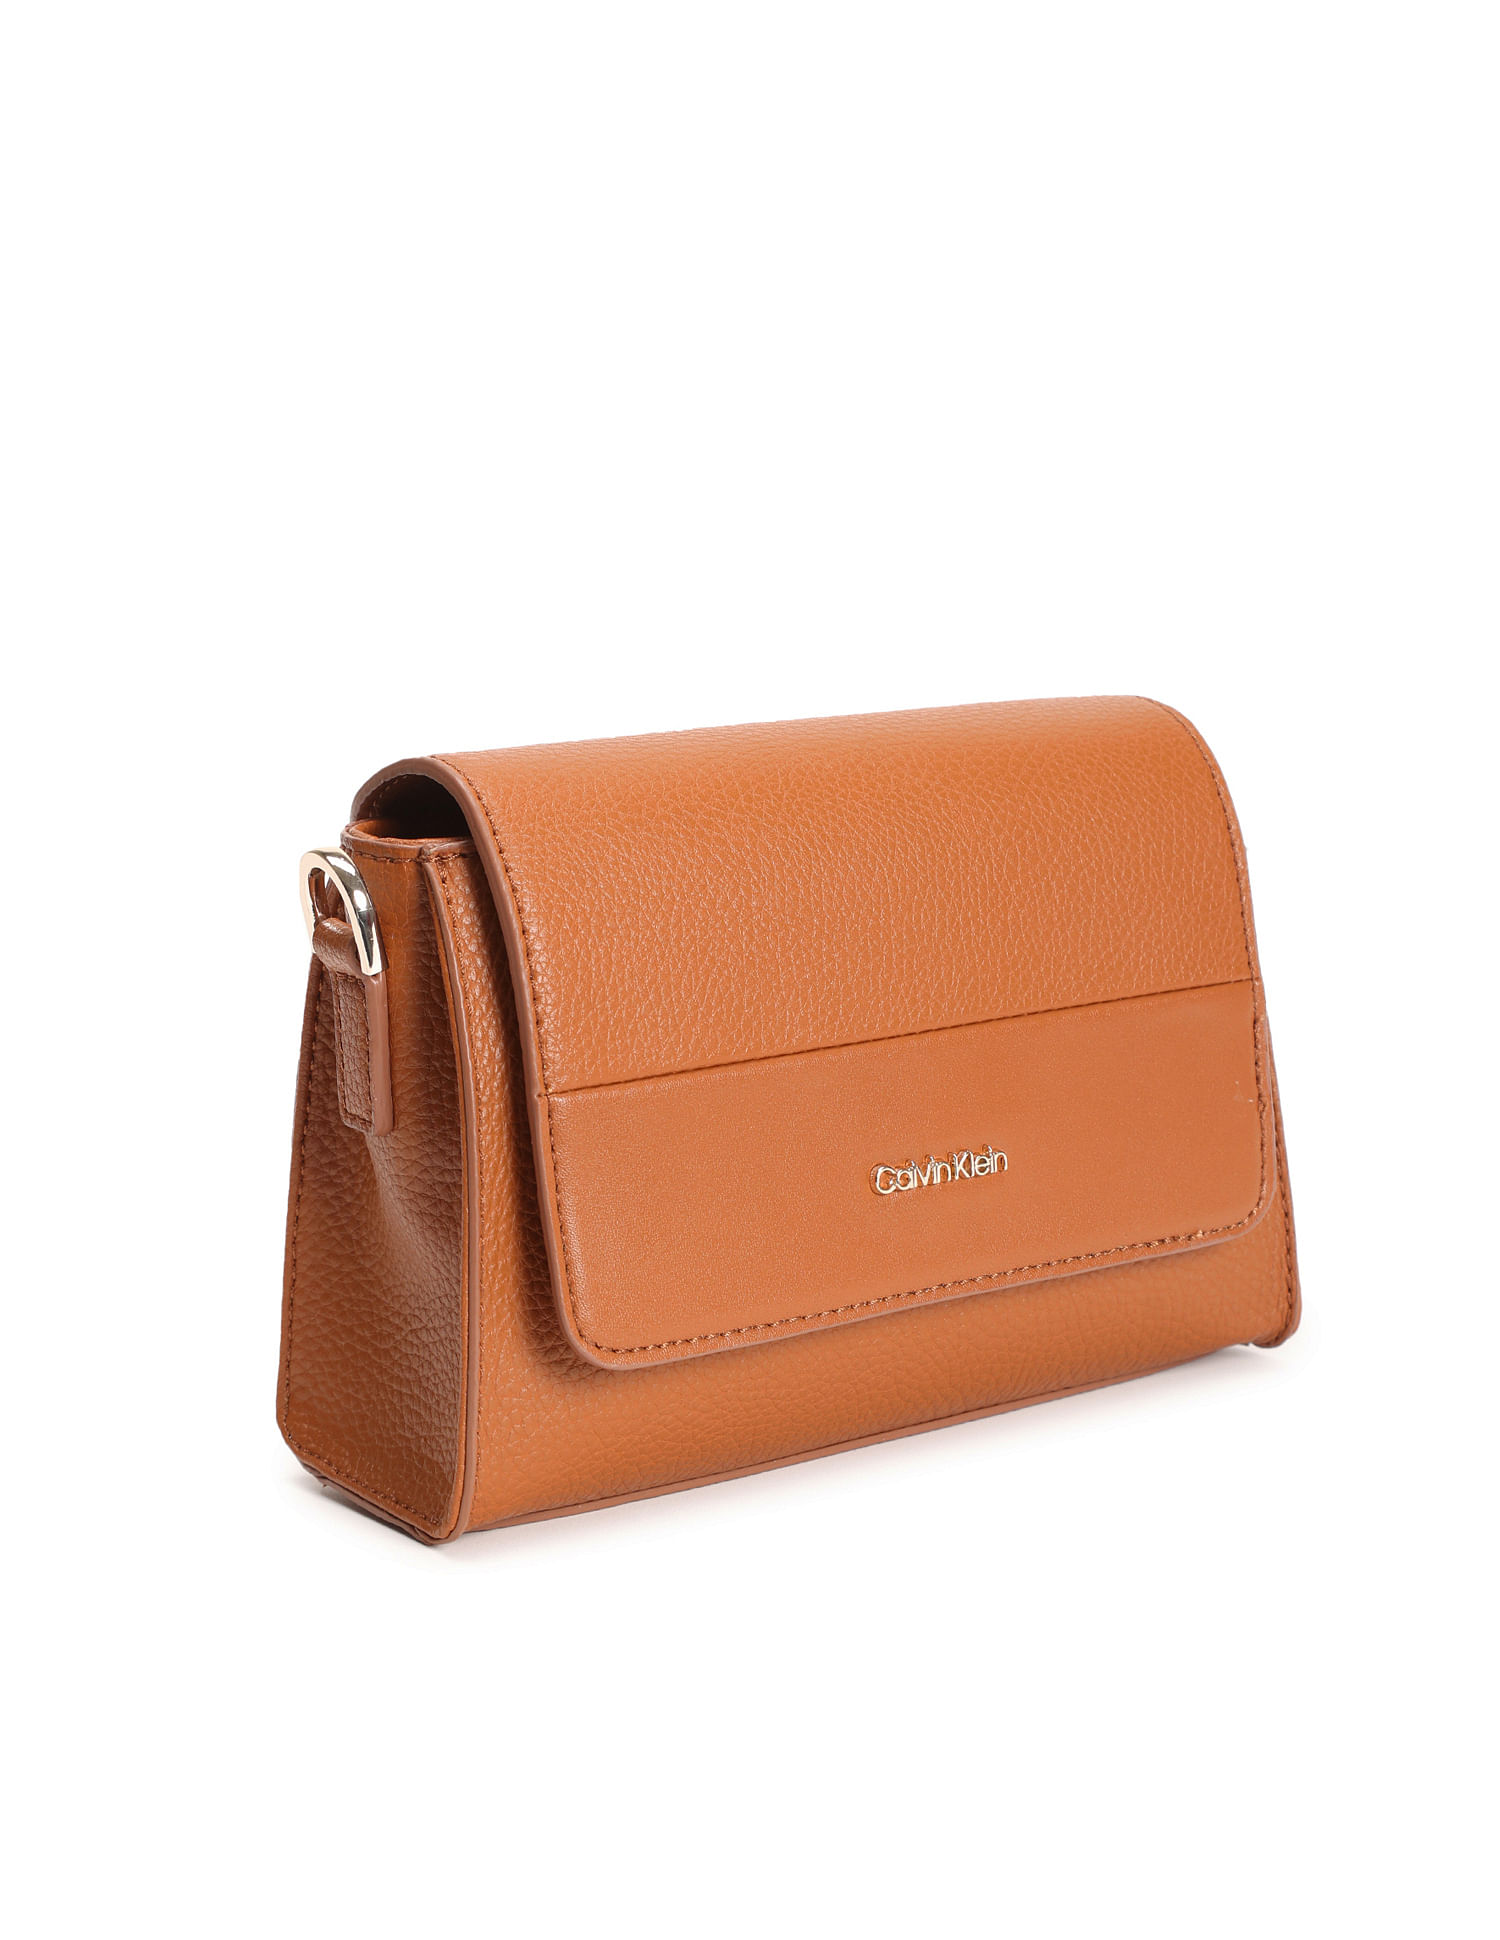 Calvin Klein Handbags for Women - Up to 40% off | Stylight